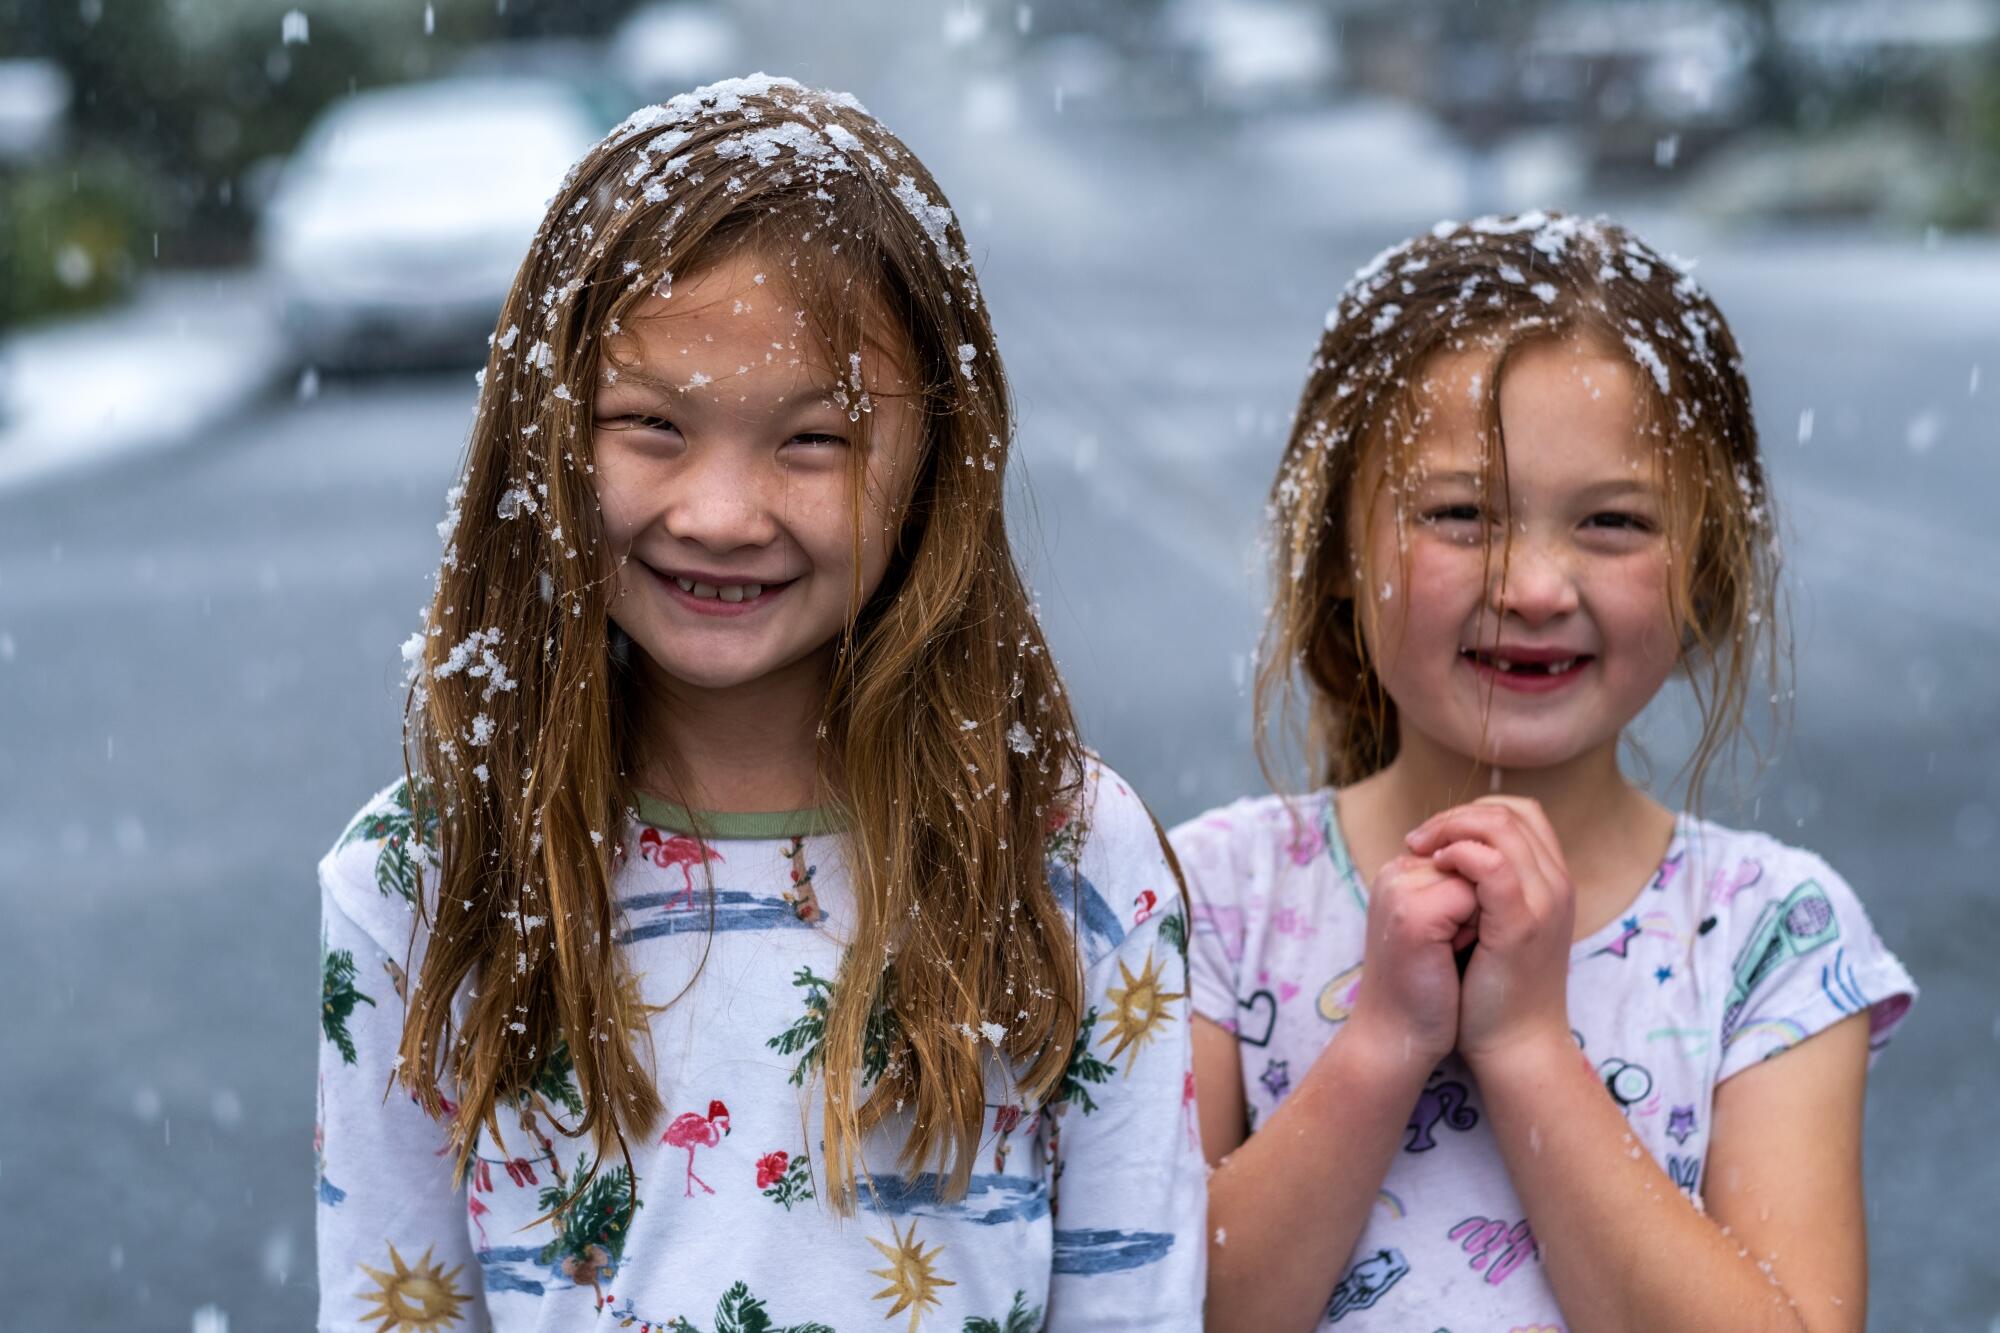 Olivia Wightman and her sister Lucy Wightman step outside their home to check out the snow falling in Glendale.